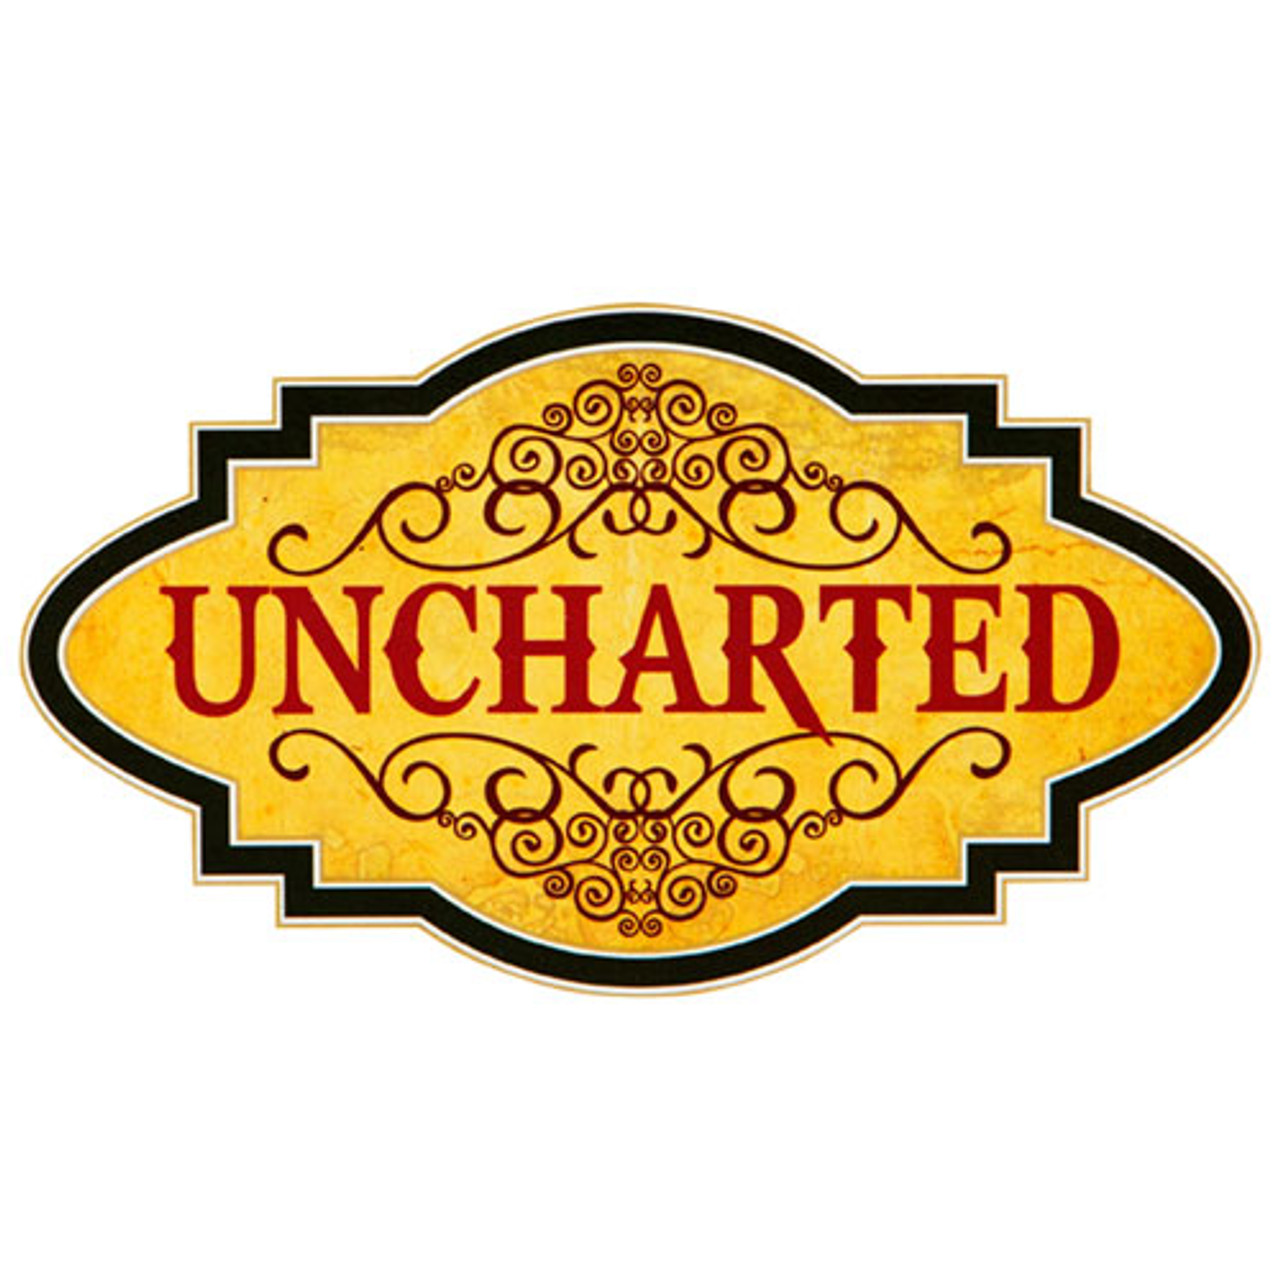 Uncharted Belicoso Cigars - 6 x 52 (Box of 20)